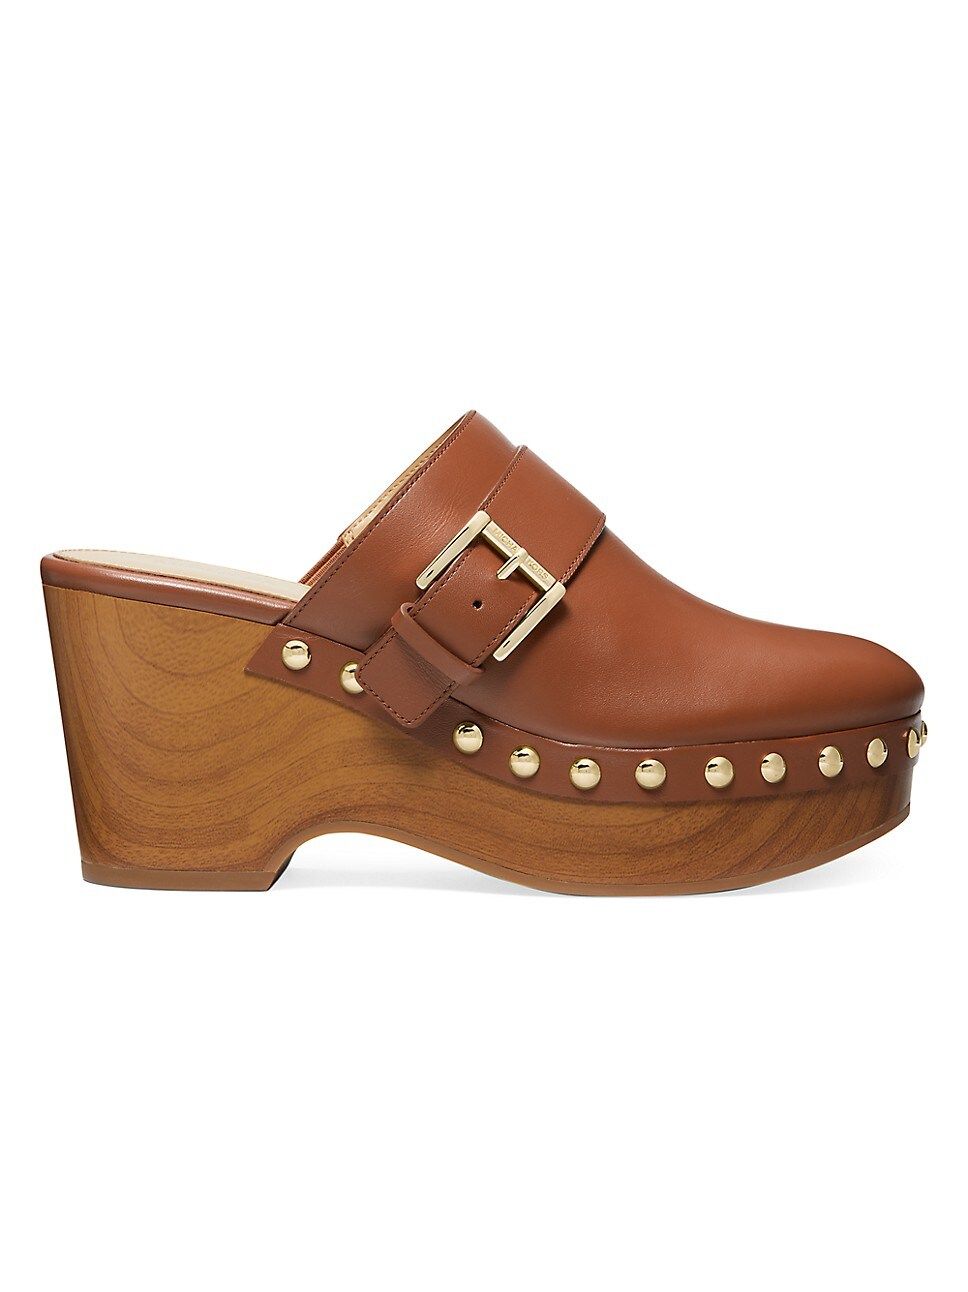 Rye 76MM Leather Clogs | Saks Fifth Avenue